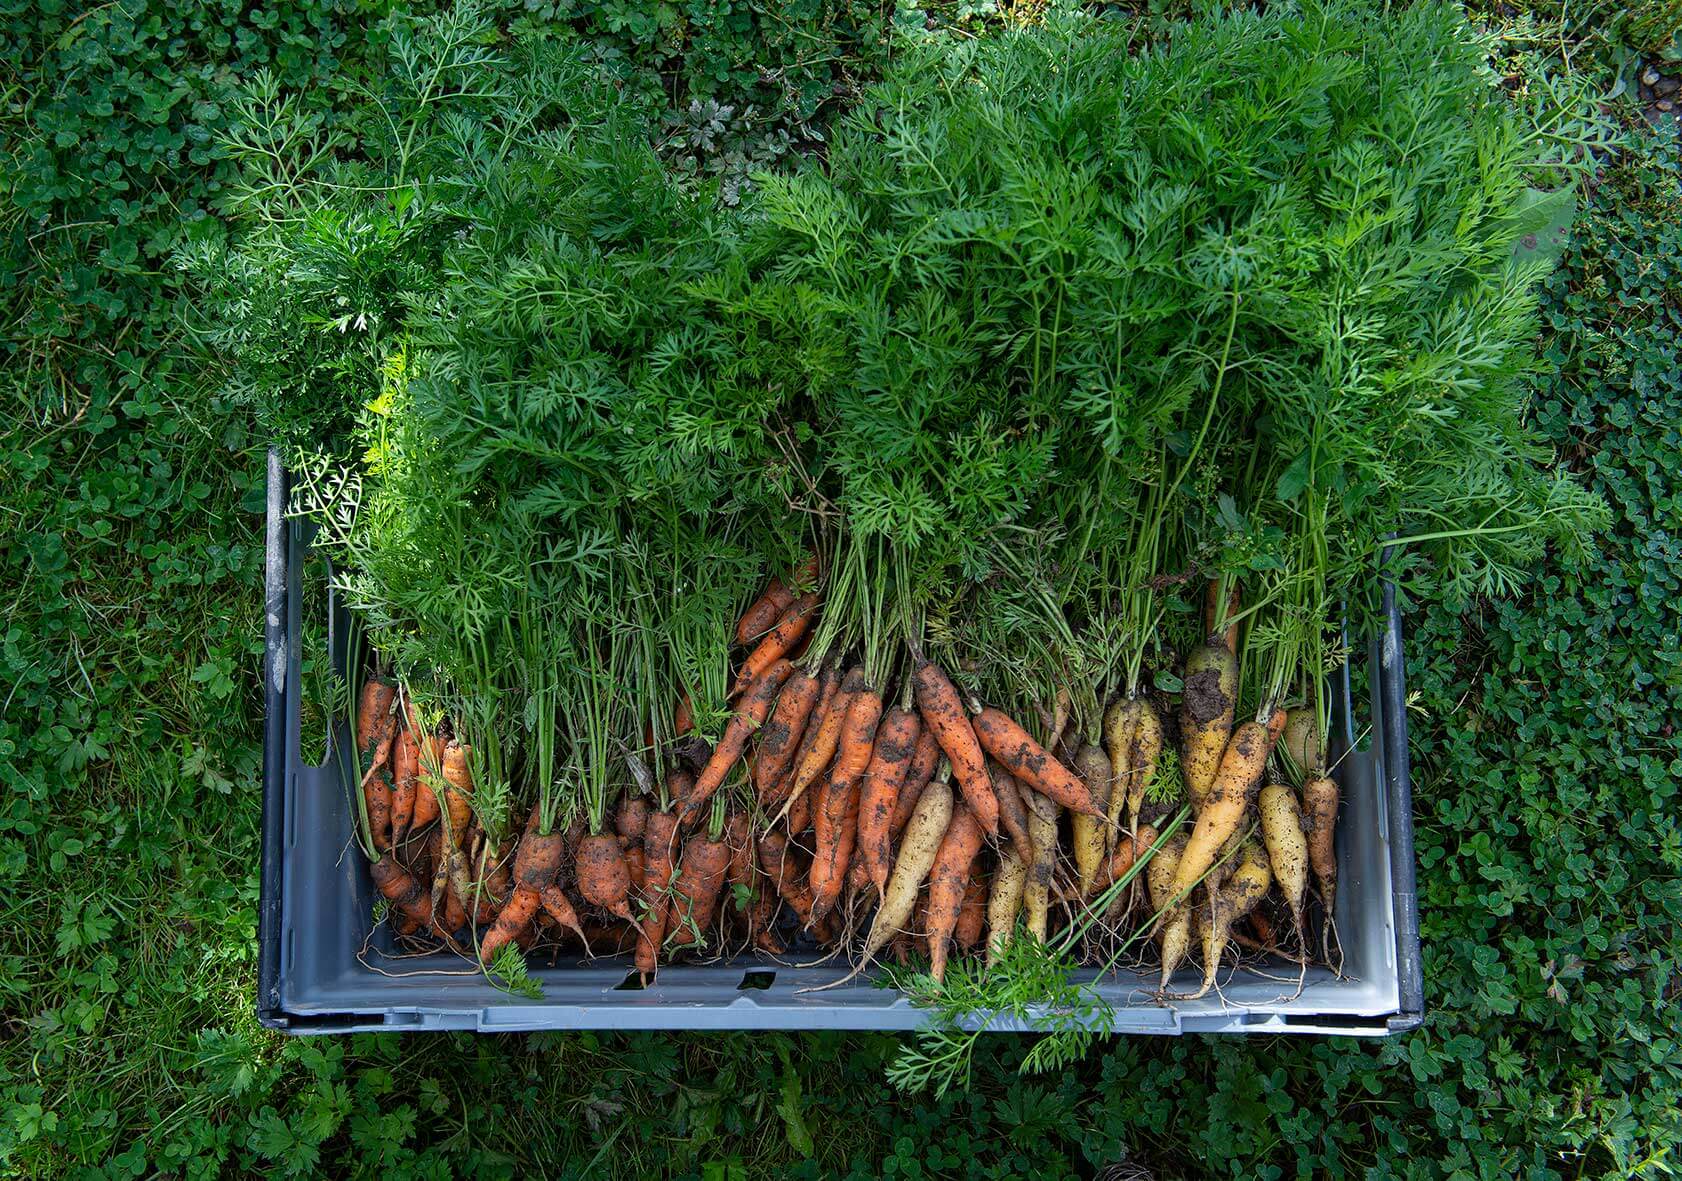 A crate of carrots